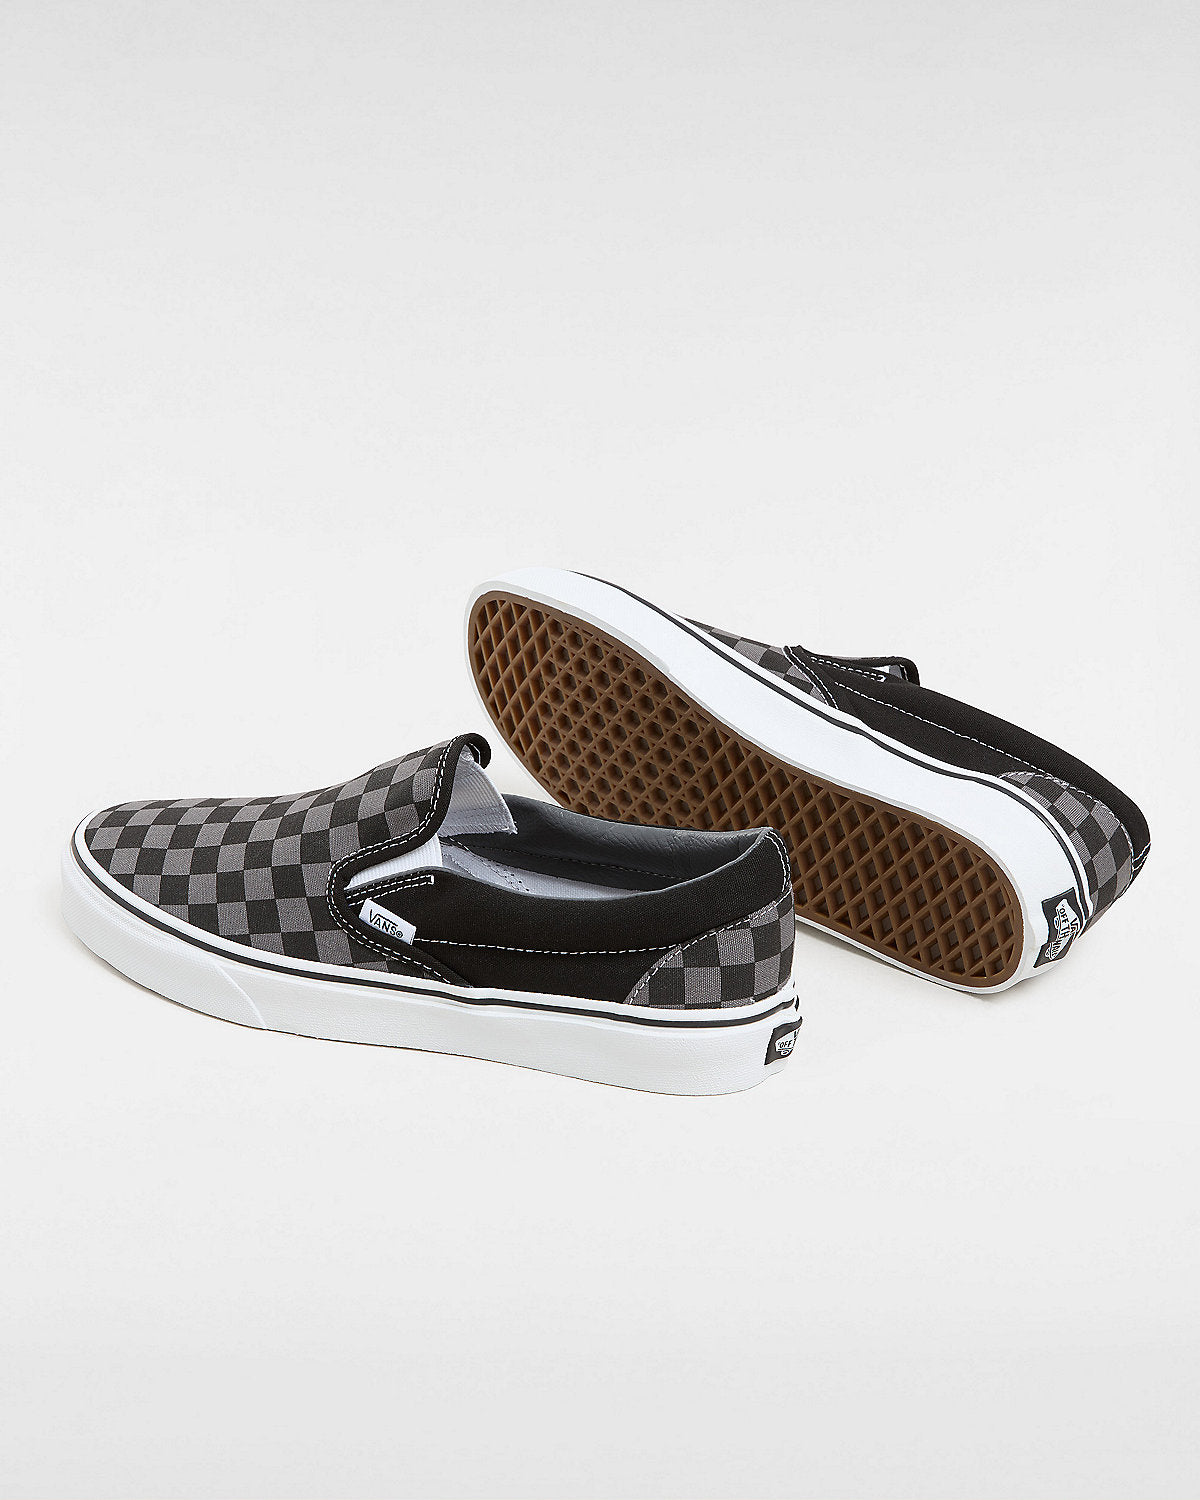 VANS Unisex Classic Slip-On Checkerboard Trainers - Black / Pewter